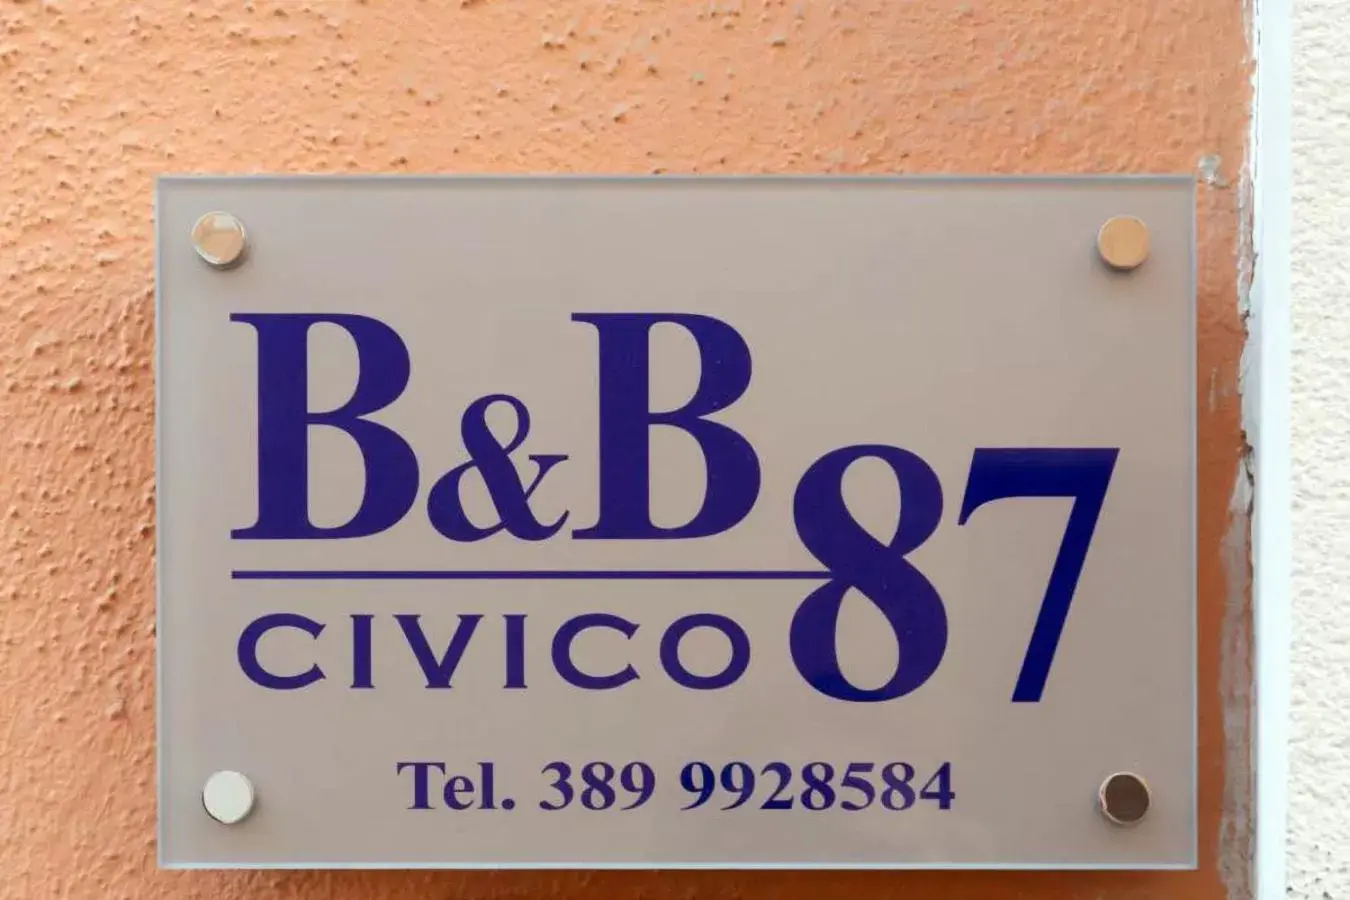 Property logo or sign in Civico 87